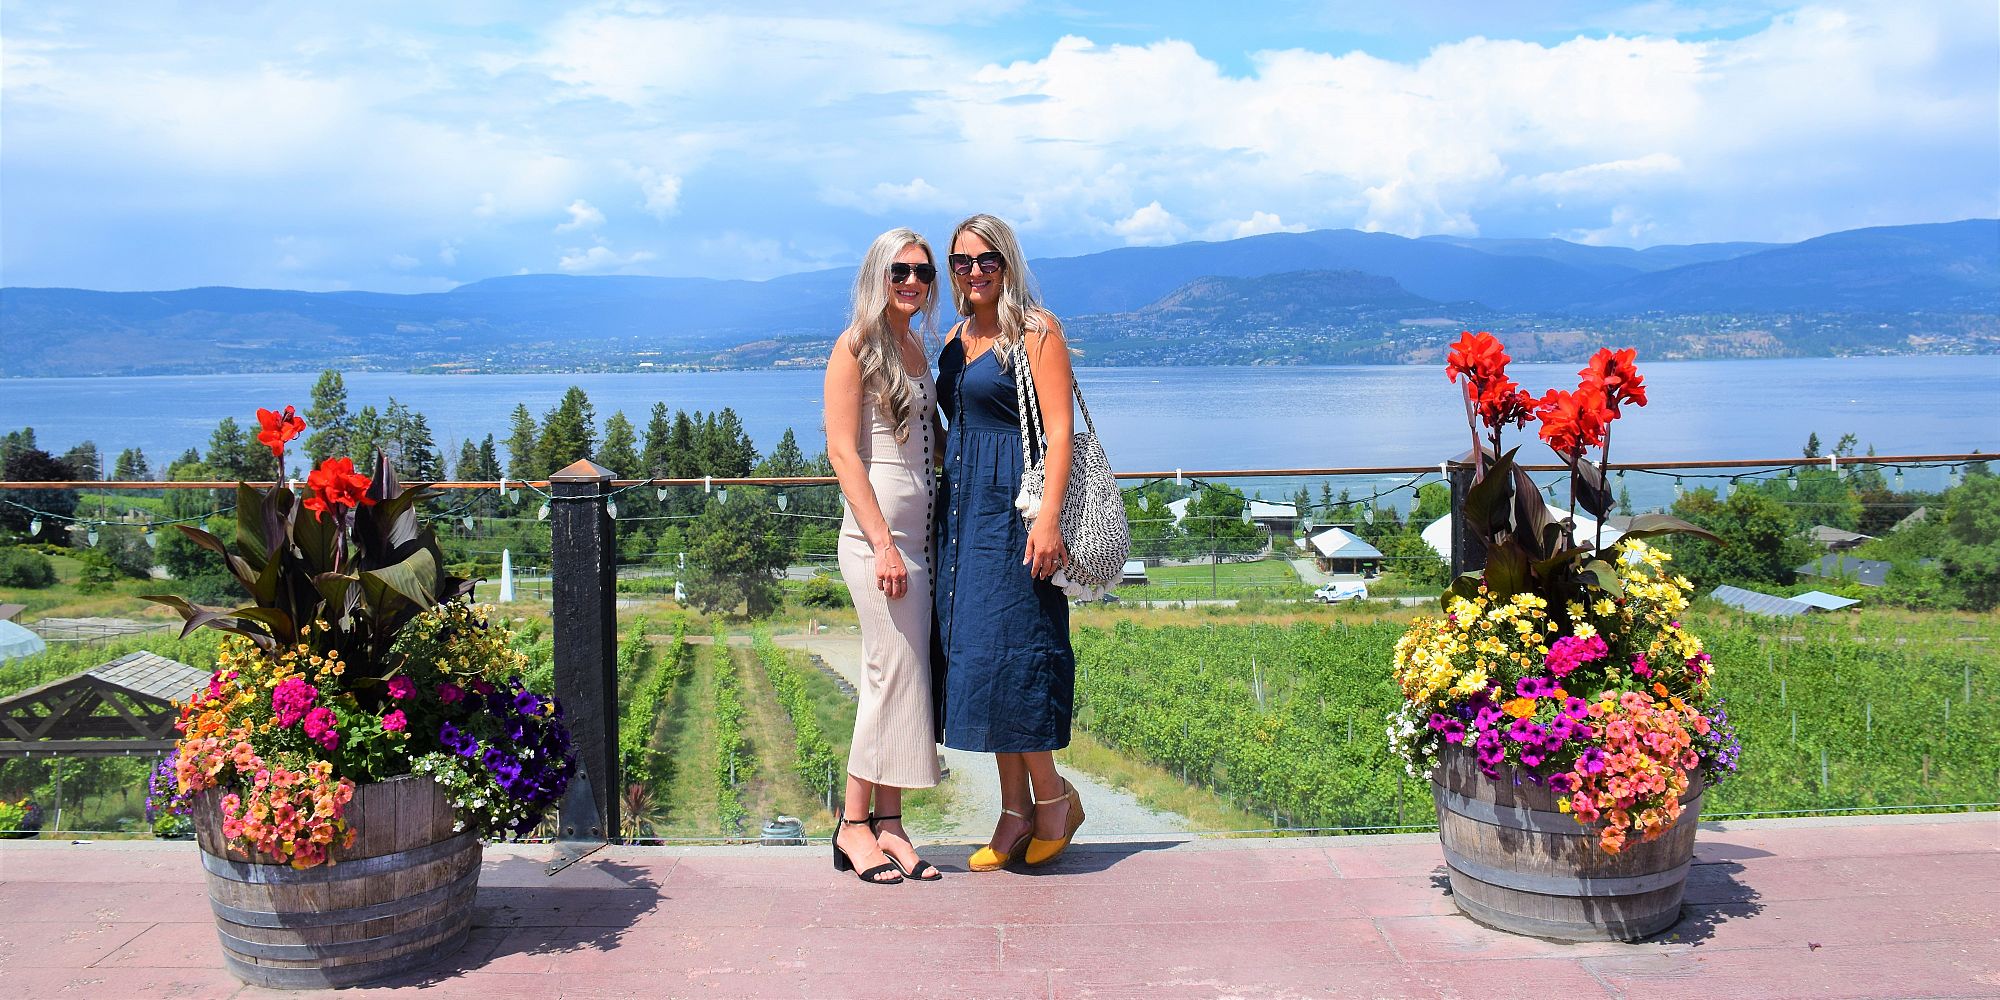 Two Ladies Overlooking Okanagan Lake And A Colorful Flower Garden On The Patio At Summerhill Pyramid Winery